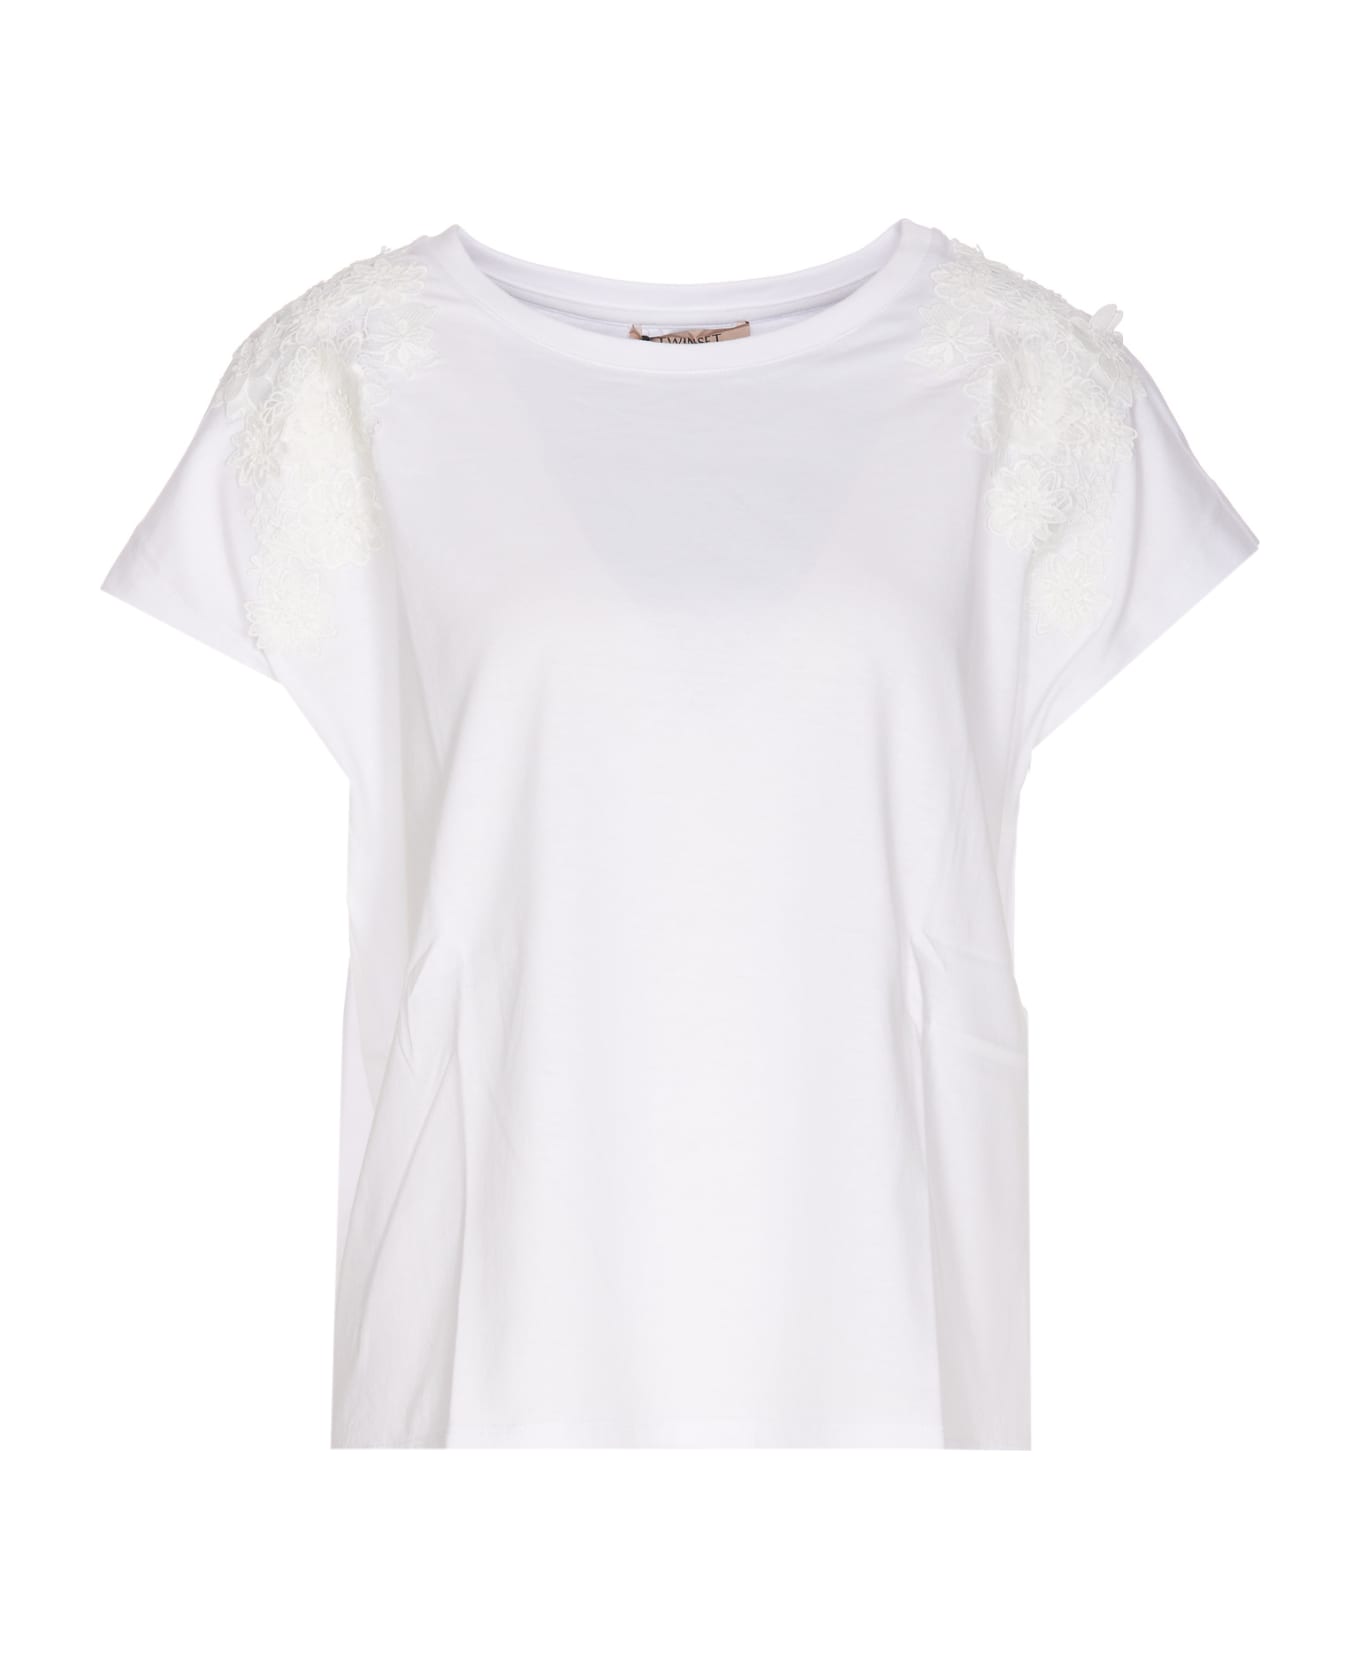 TwinSet T-shirt With Lace Details - Bianco Tシャツ